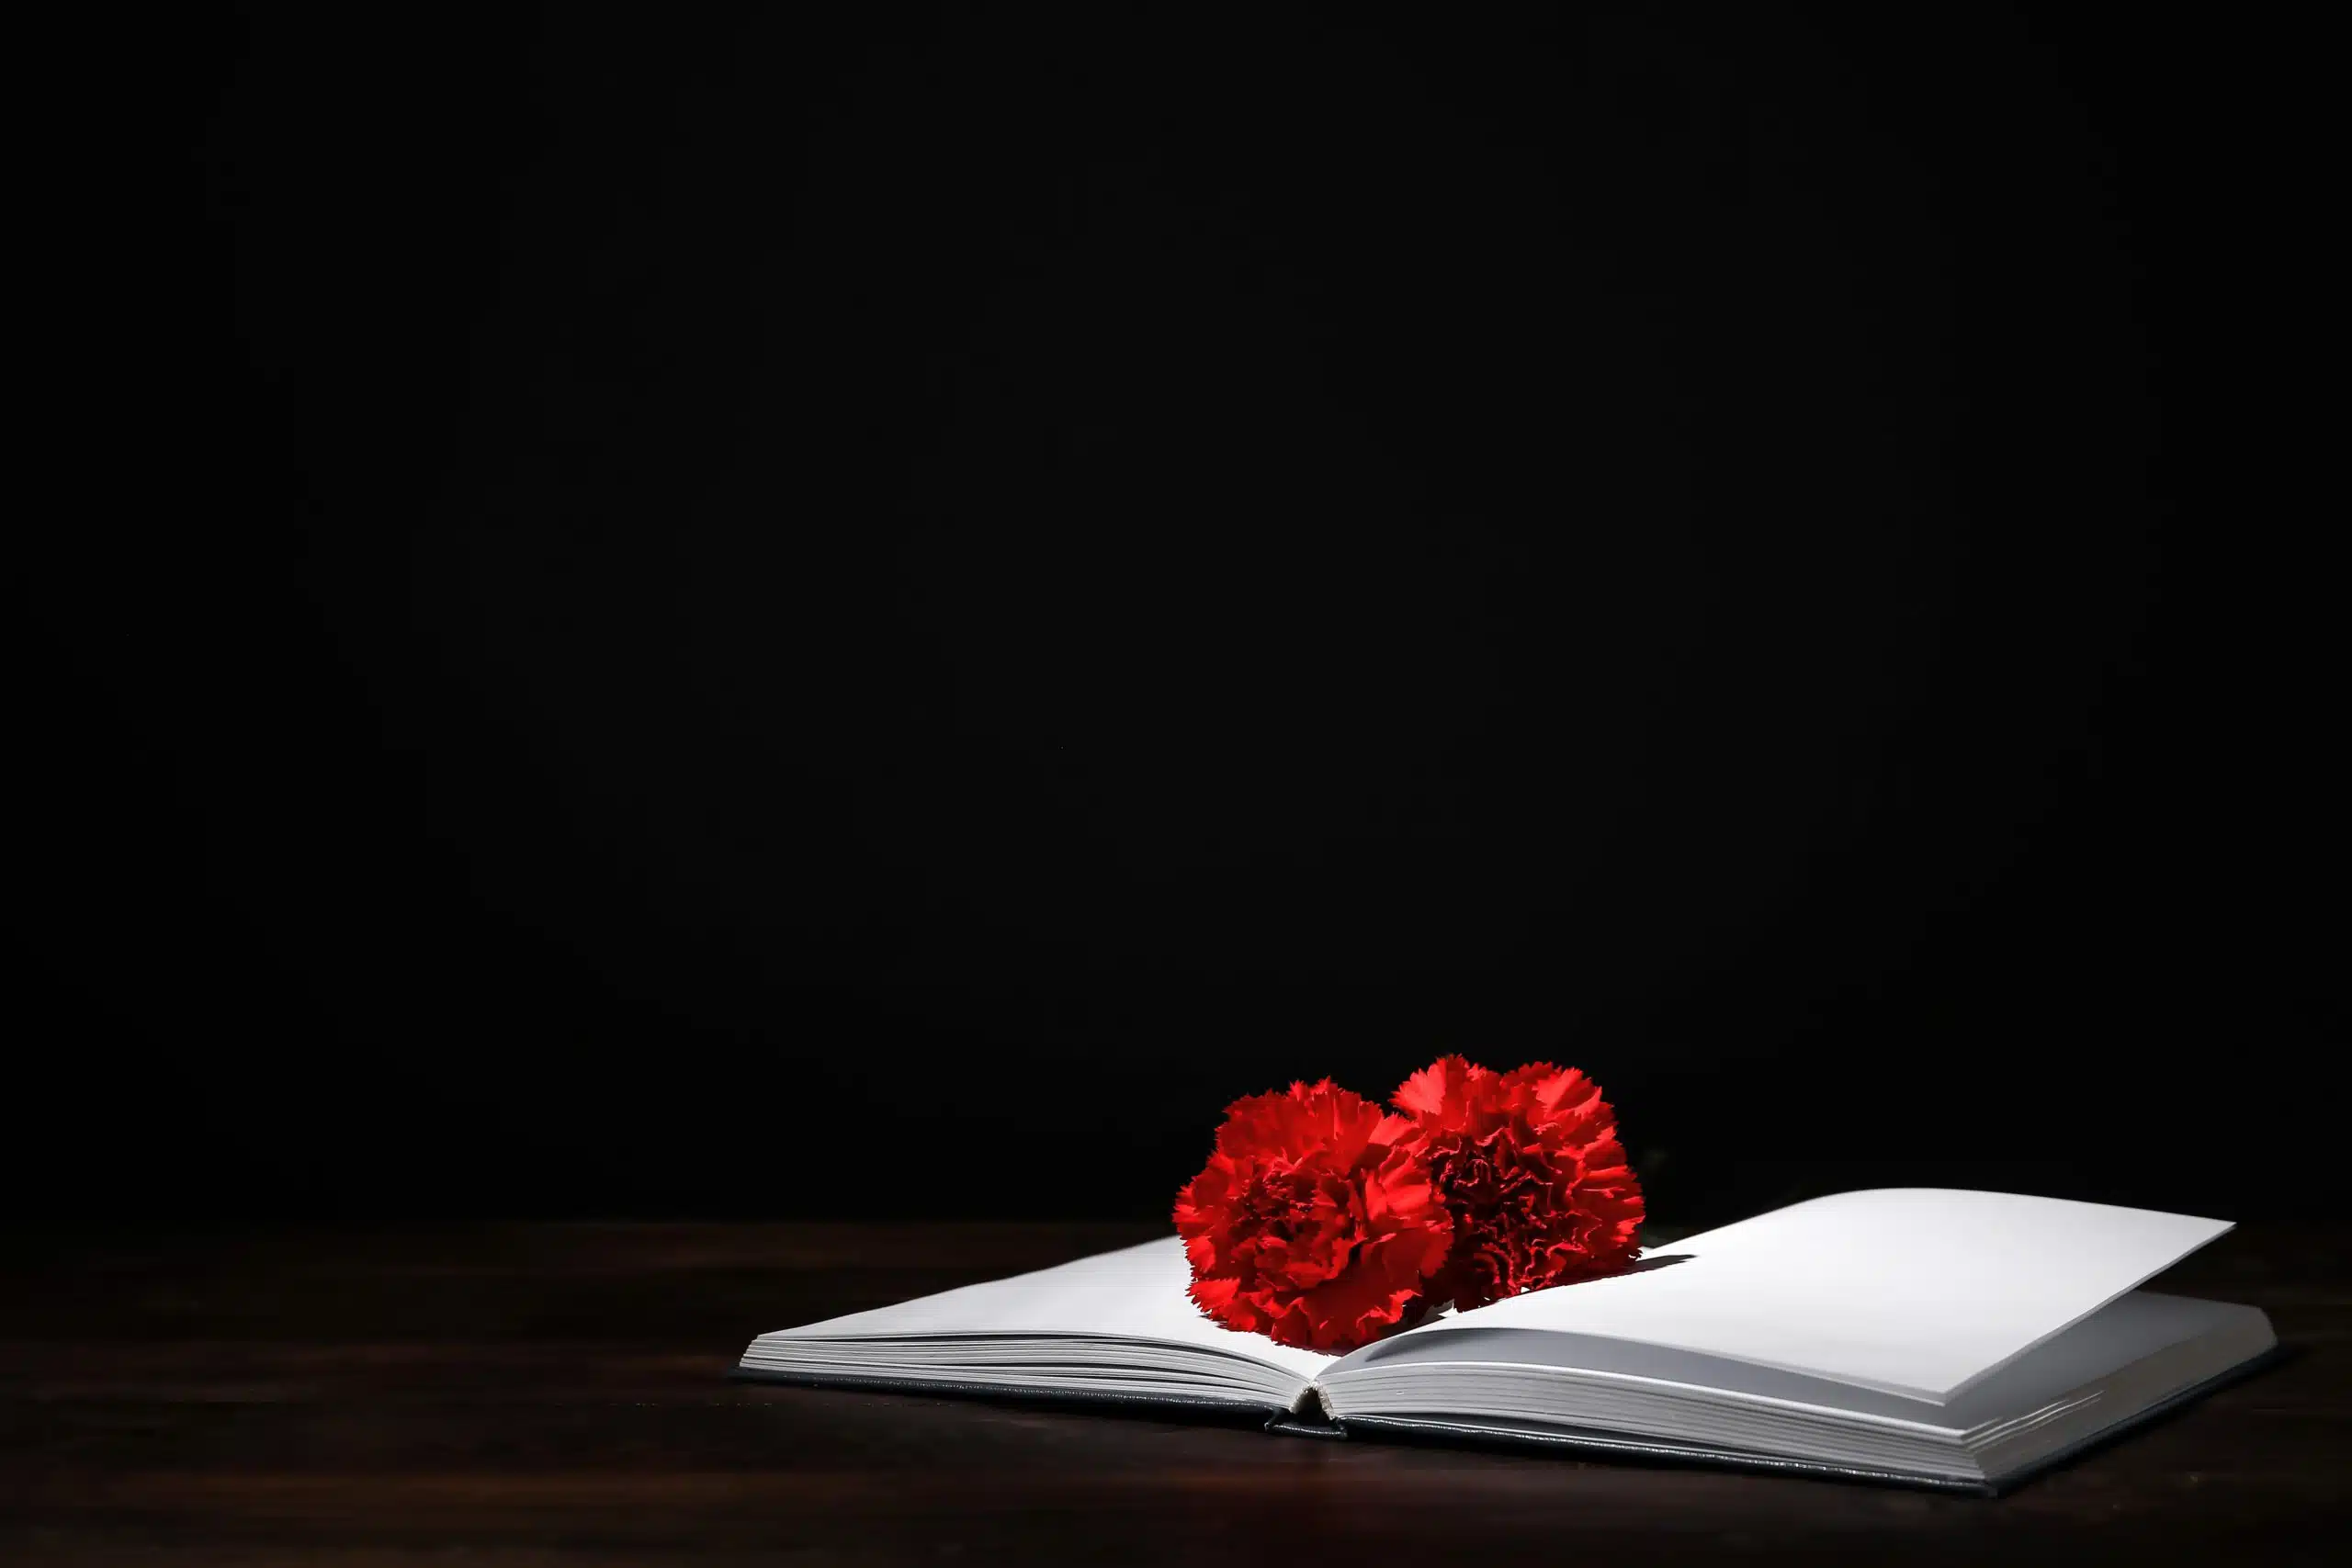 Book with carnation flowers on table against black background